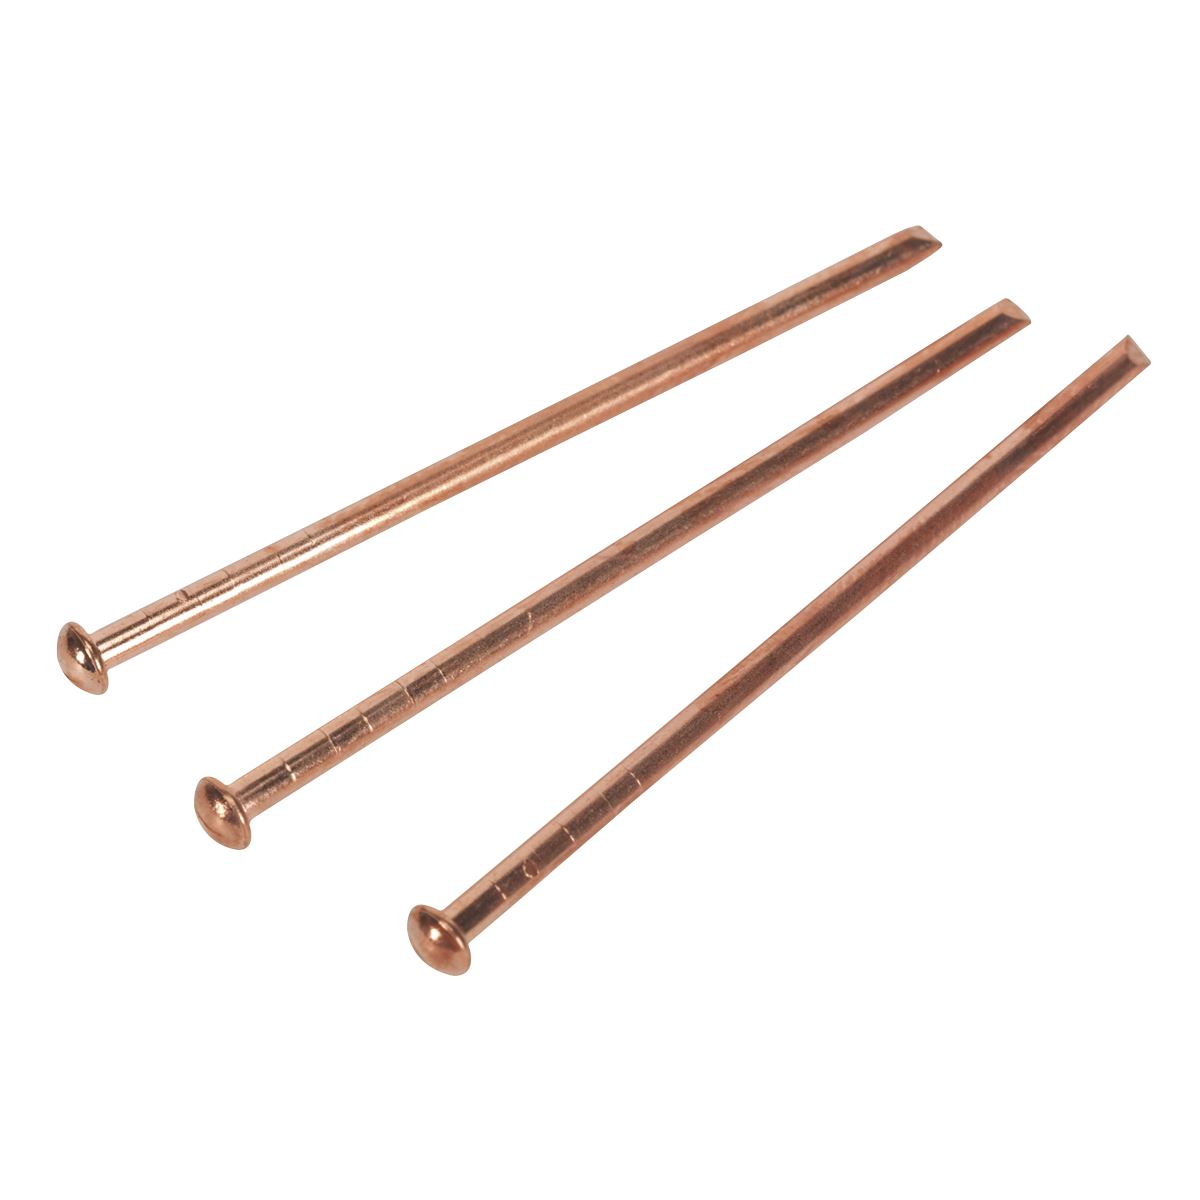 Sealey Stud Welding Nail 2 x 50mm - Pack of 200